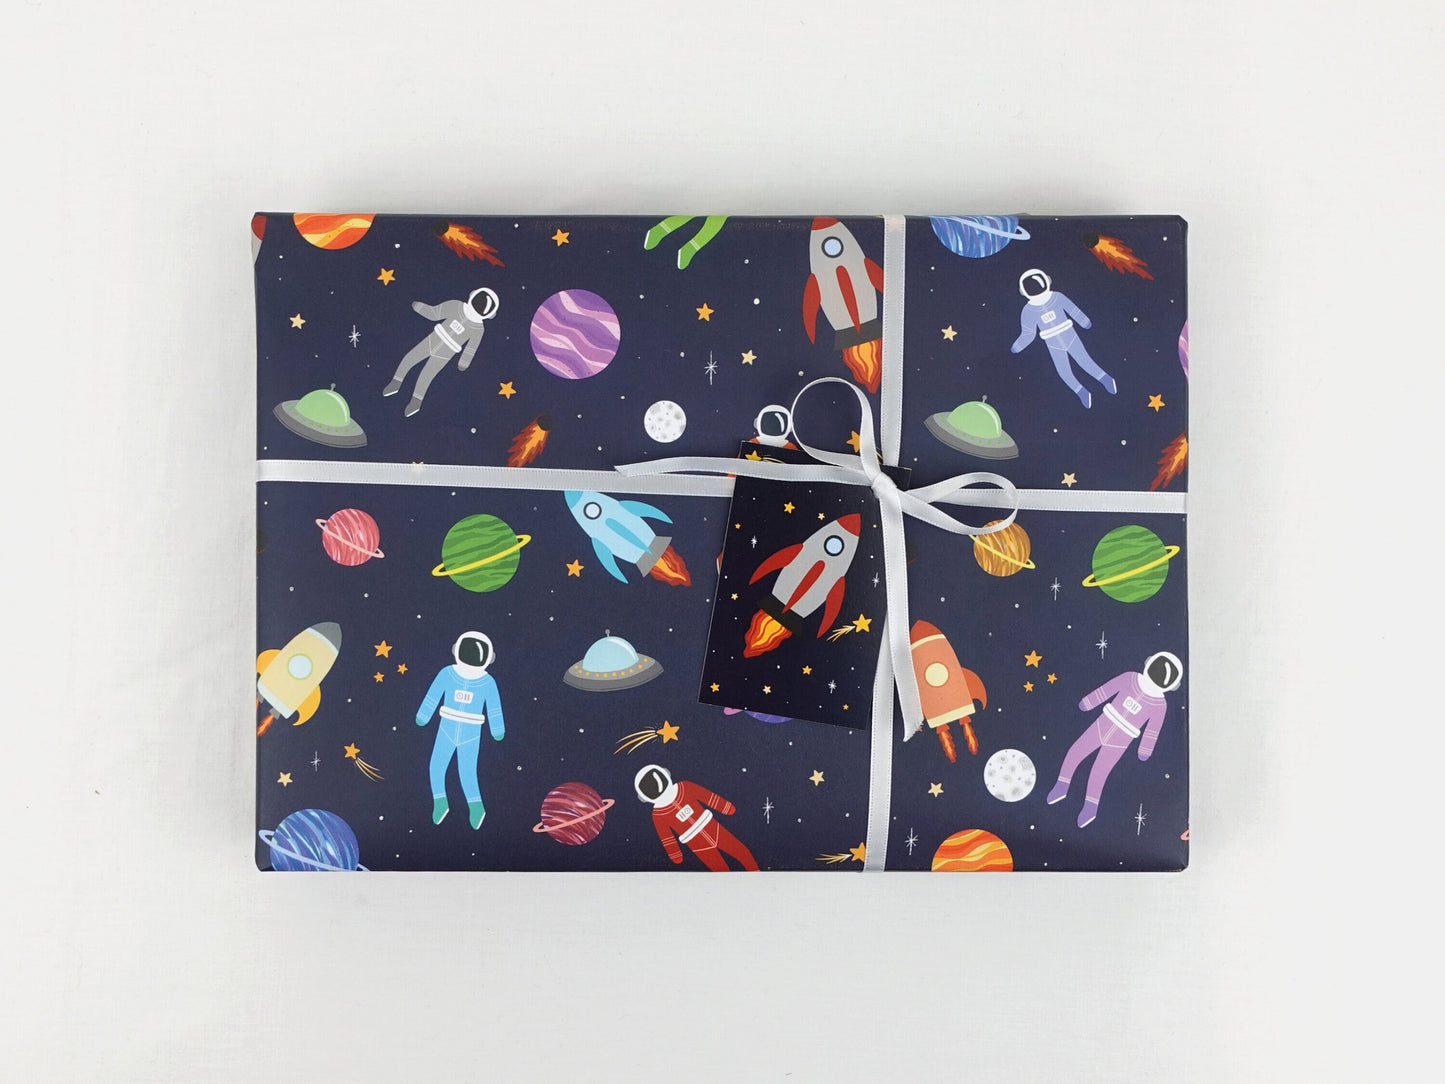 Space wrapping paper | Children's astronauts spaceman | Eco friendly gift wrap | Premium sheets + Tags | Zero plastic packaging 70x50cm